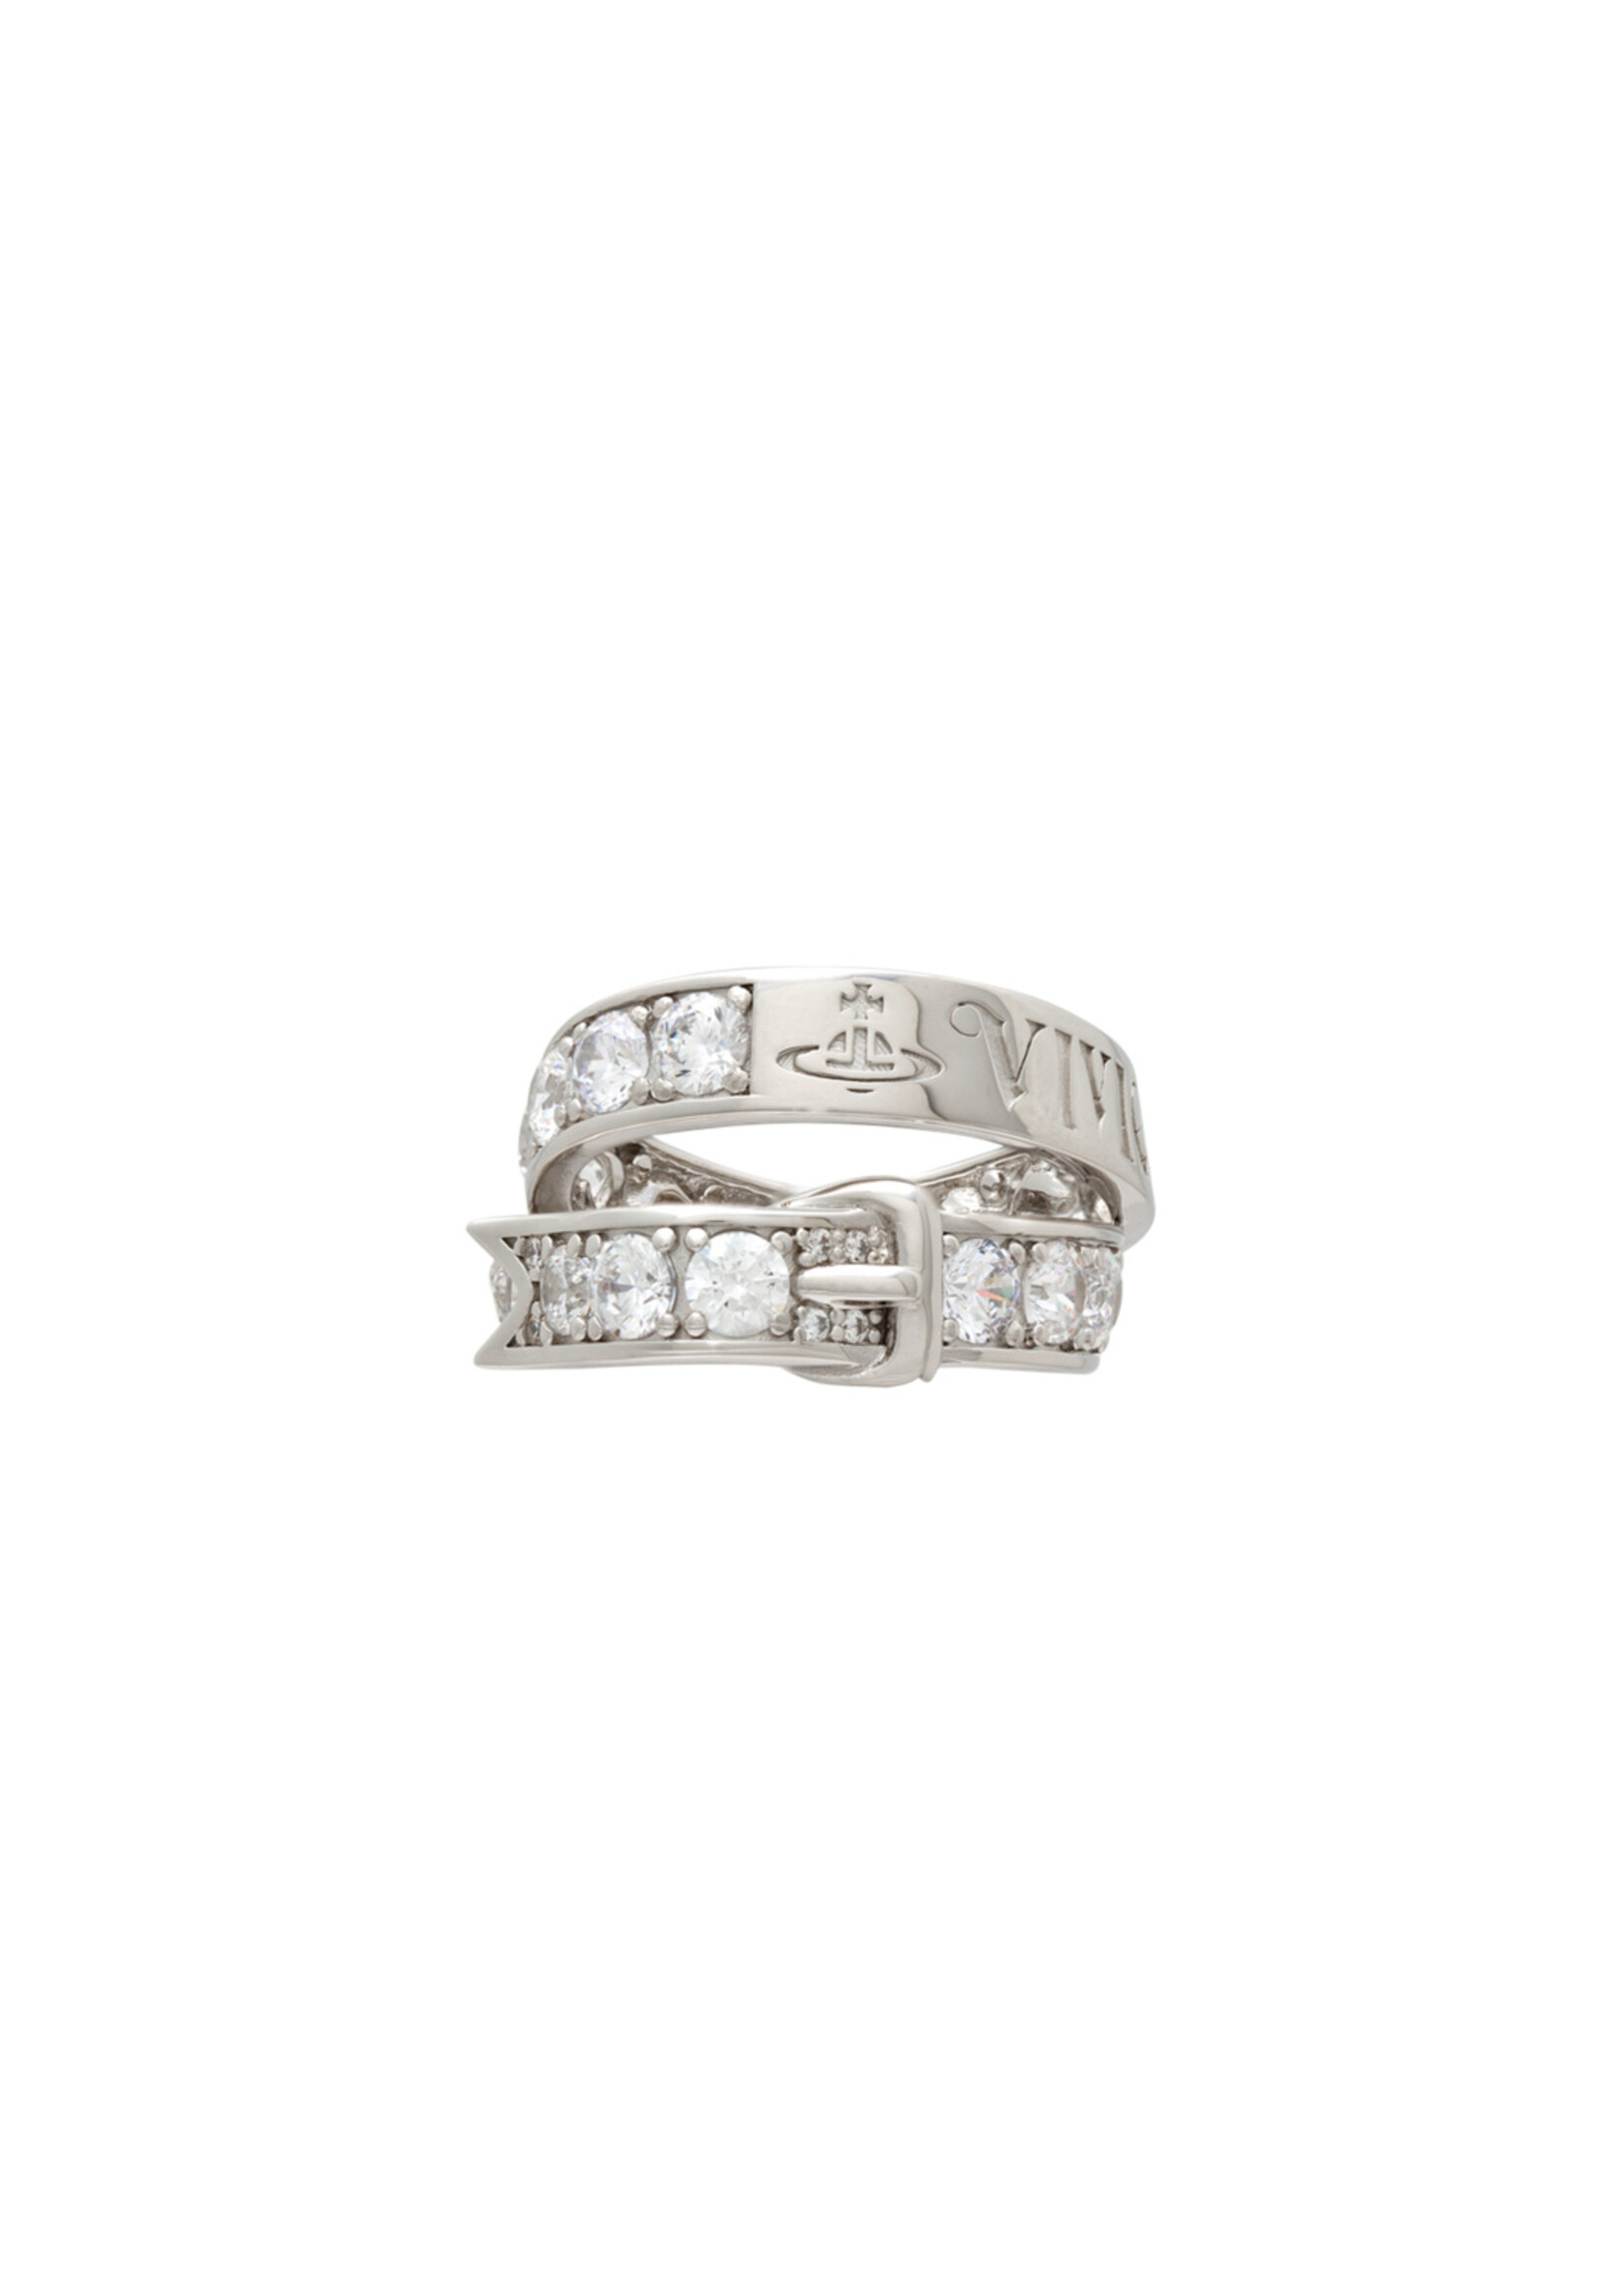 VIVIENNE WESTWOOD Women's New Belt Ring in Silver and Crystal